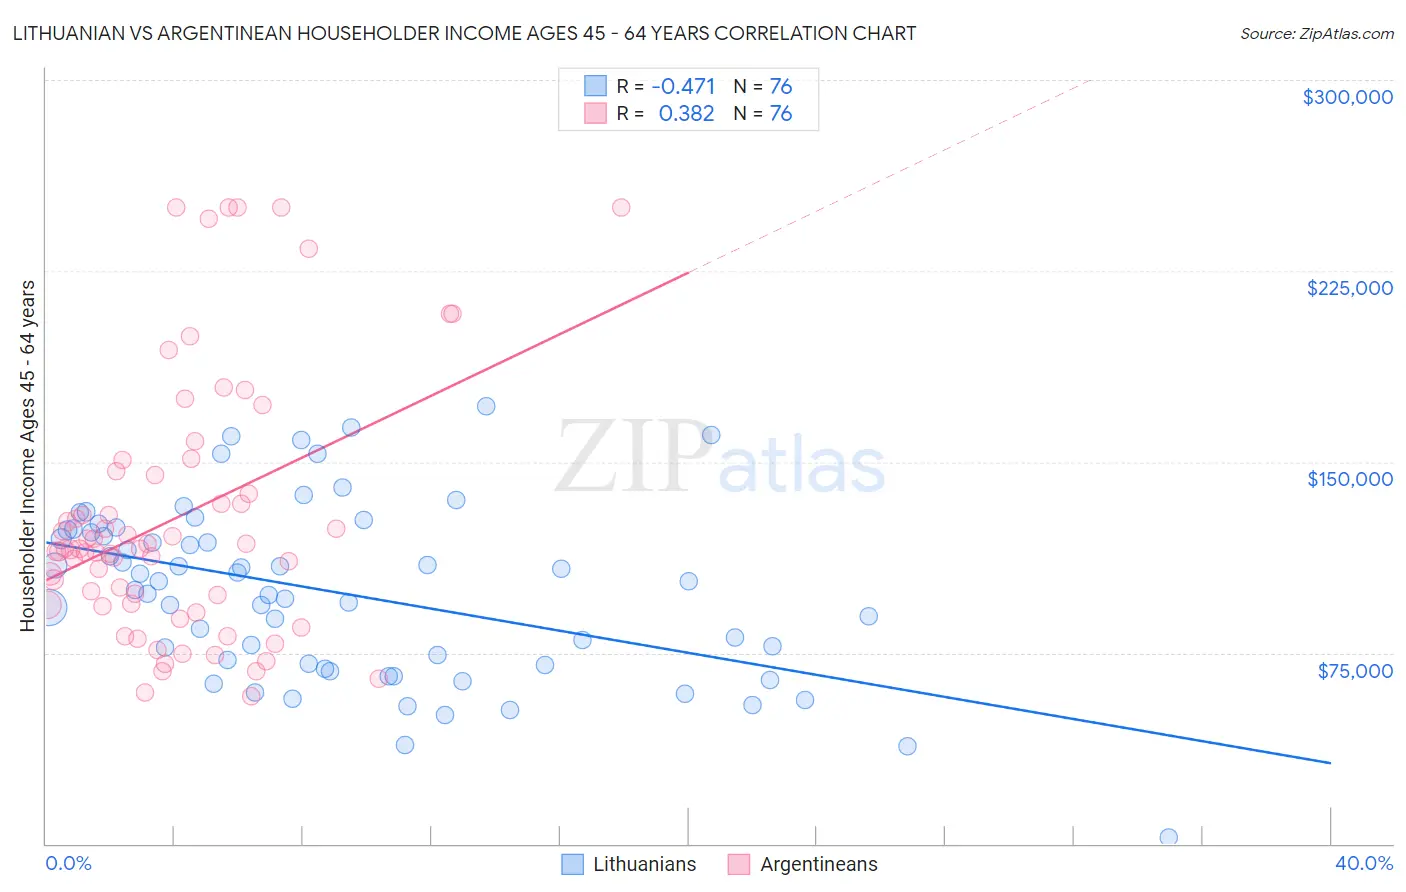 Lithuanian vs Argentinean Householder Income Ages 45 - 64 years